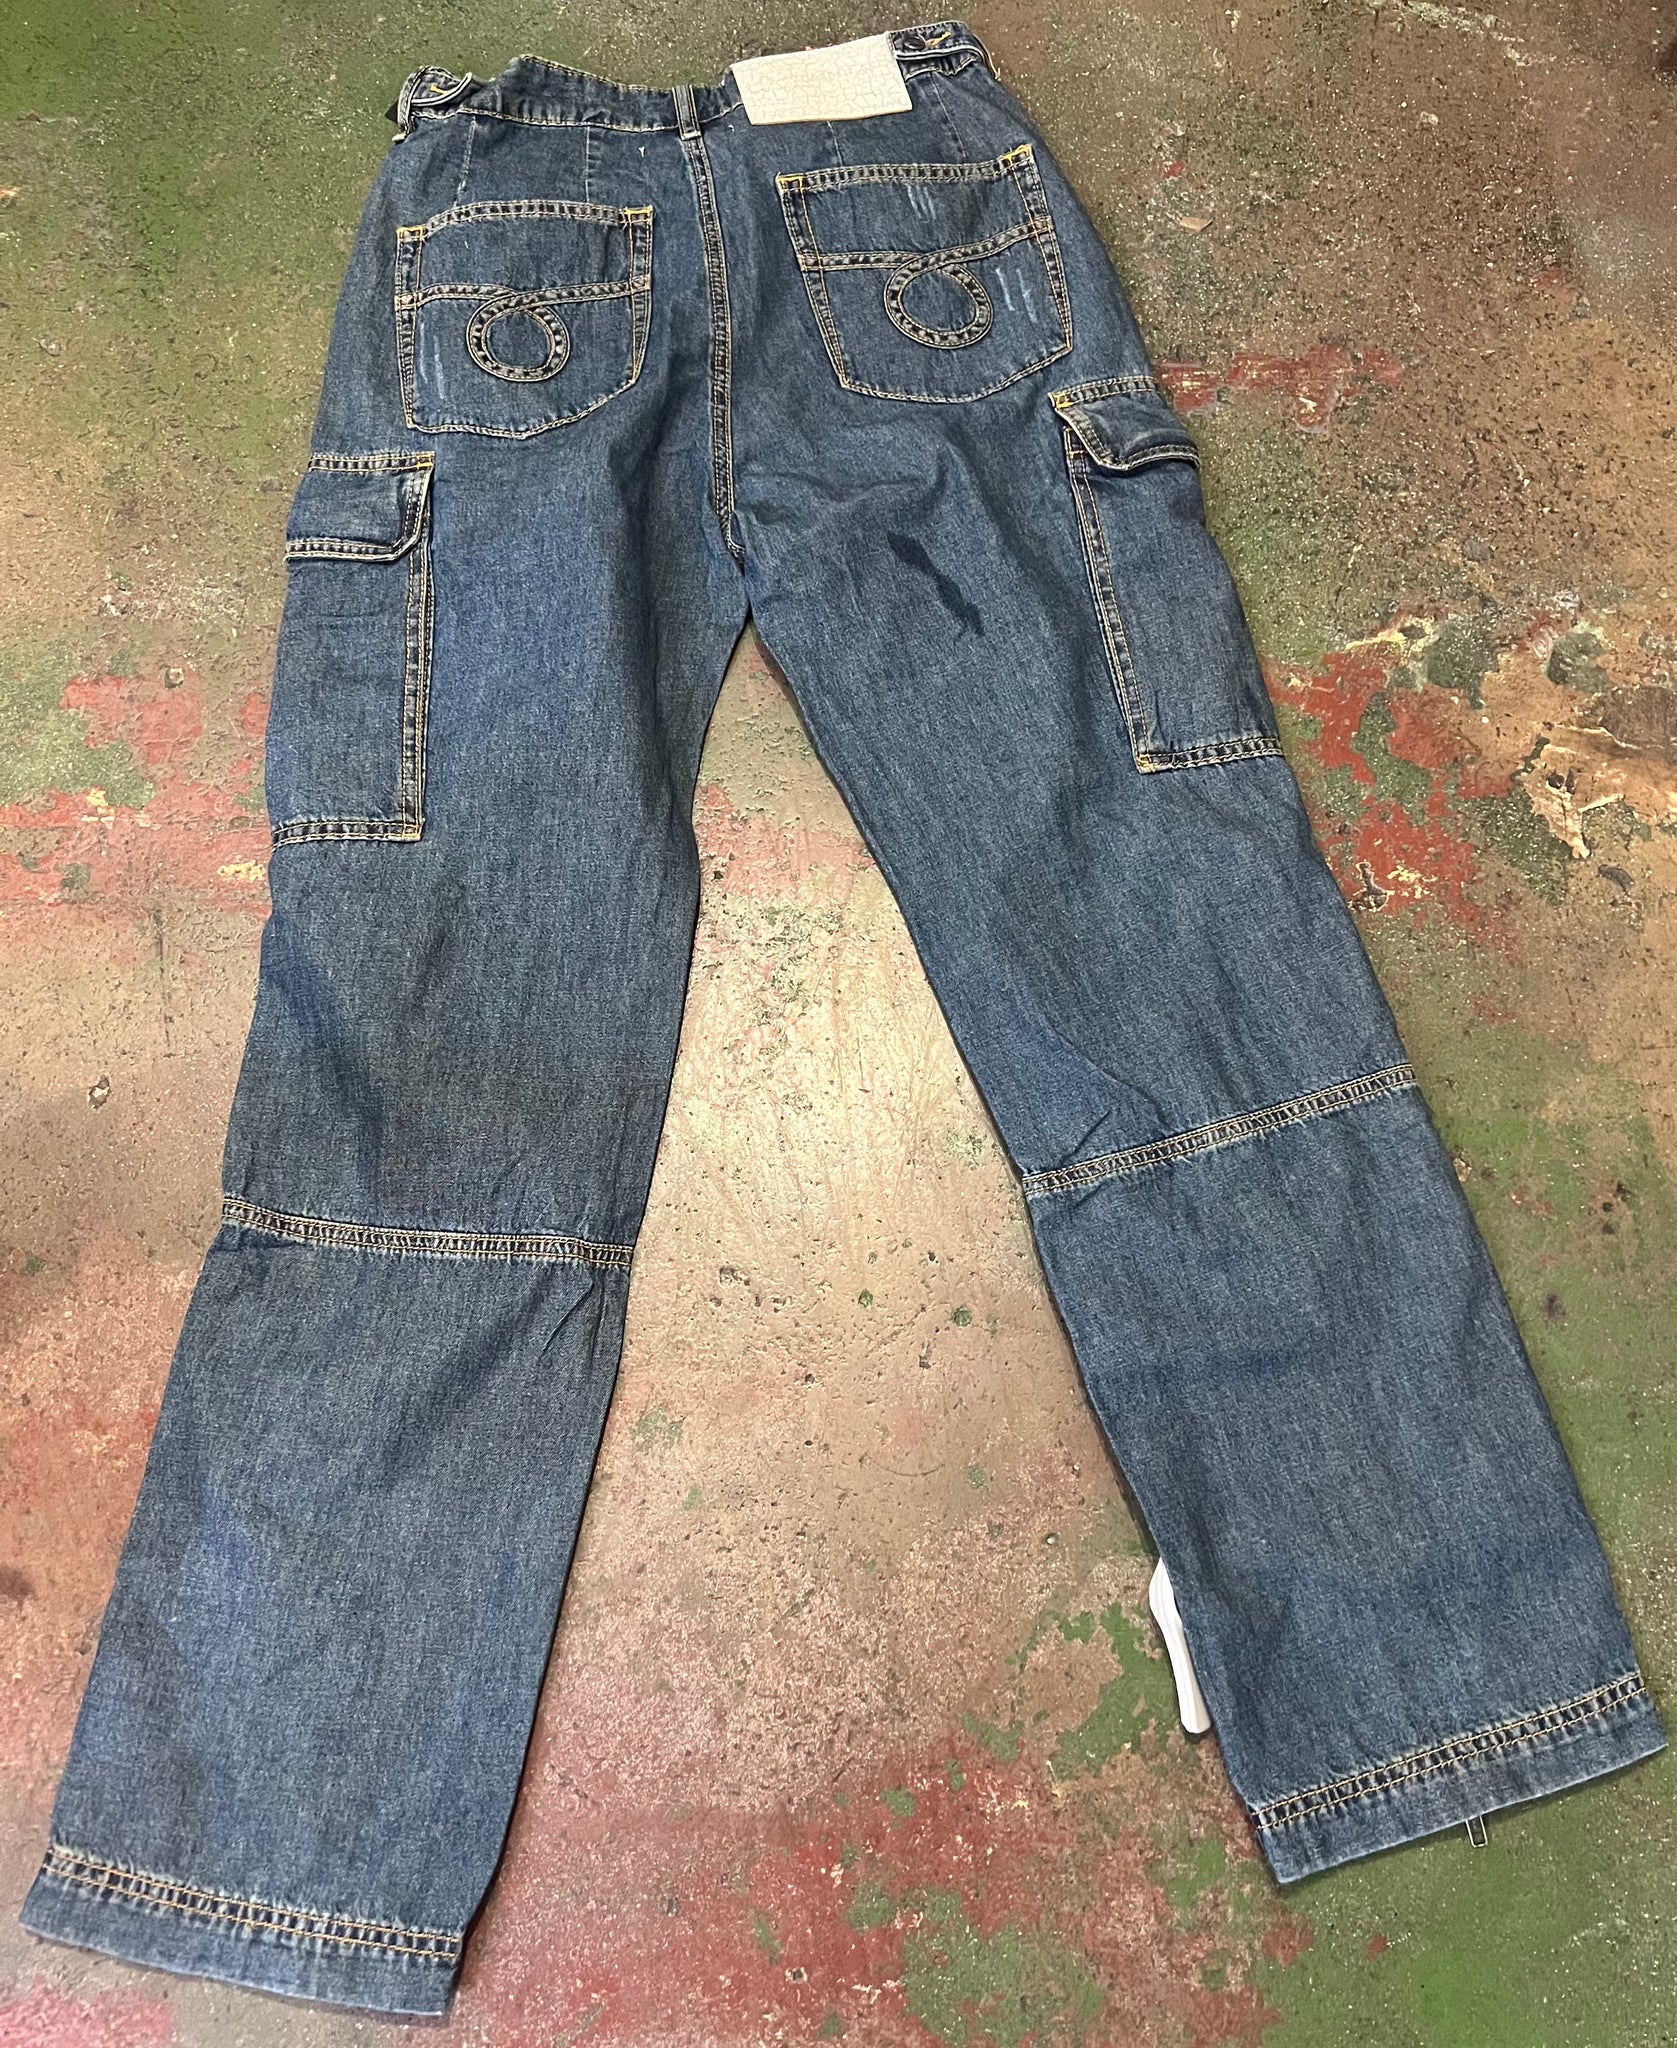 Zipped Cargo Motion Jeans